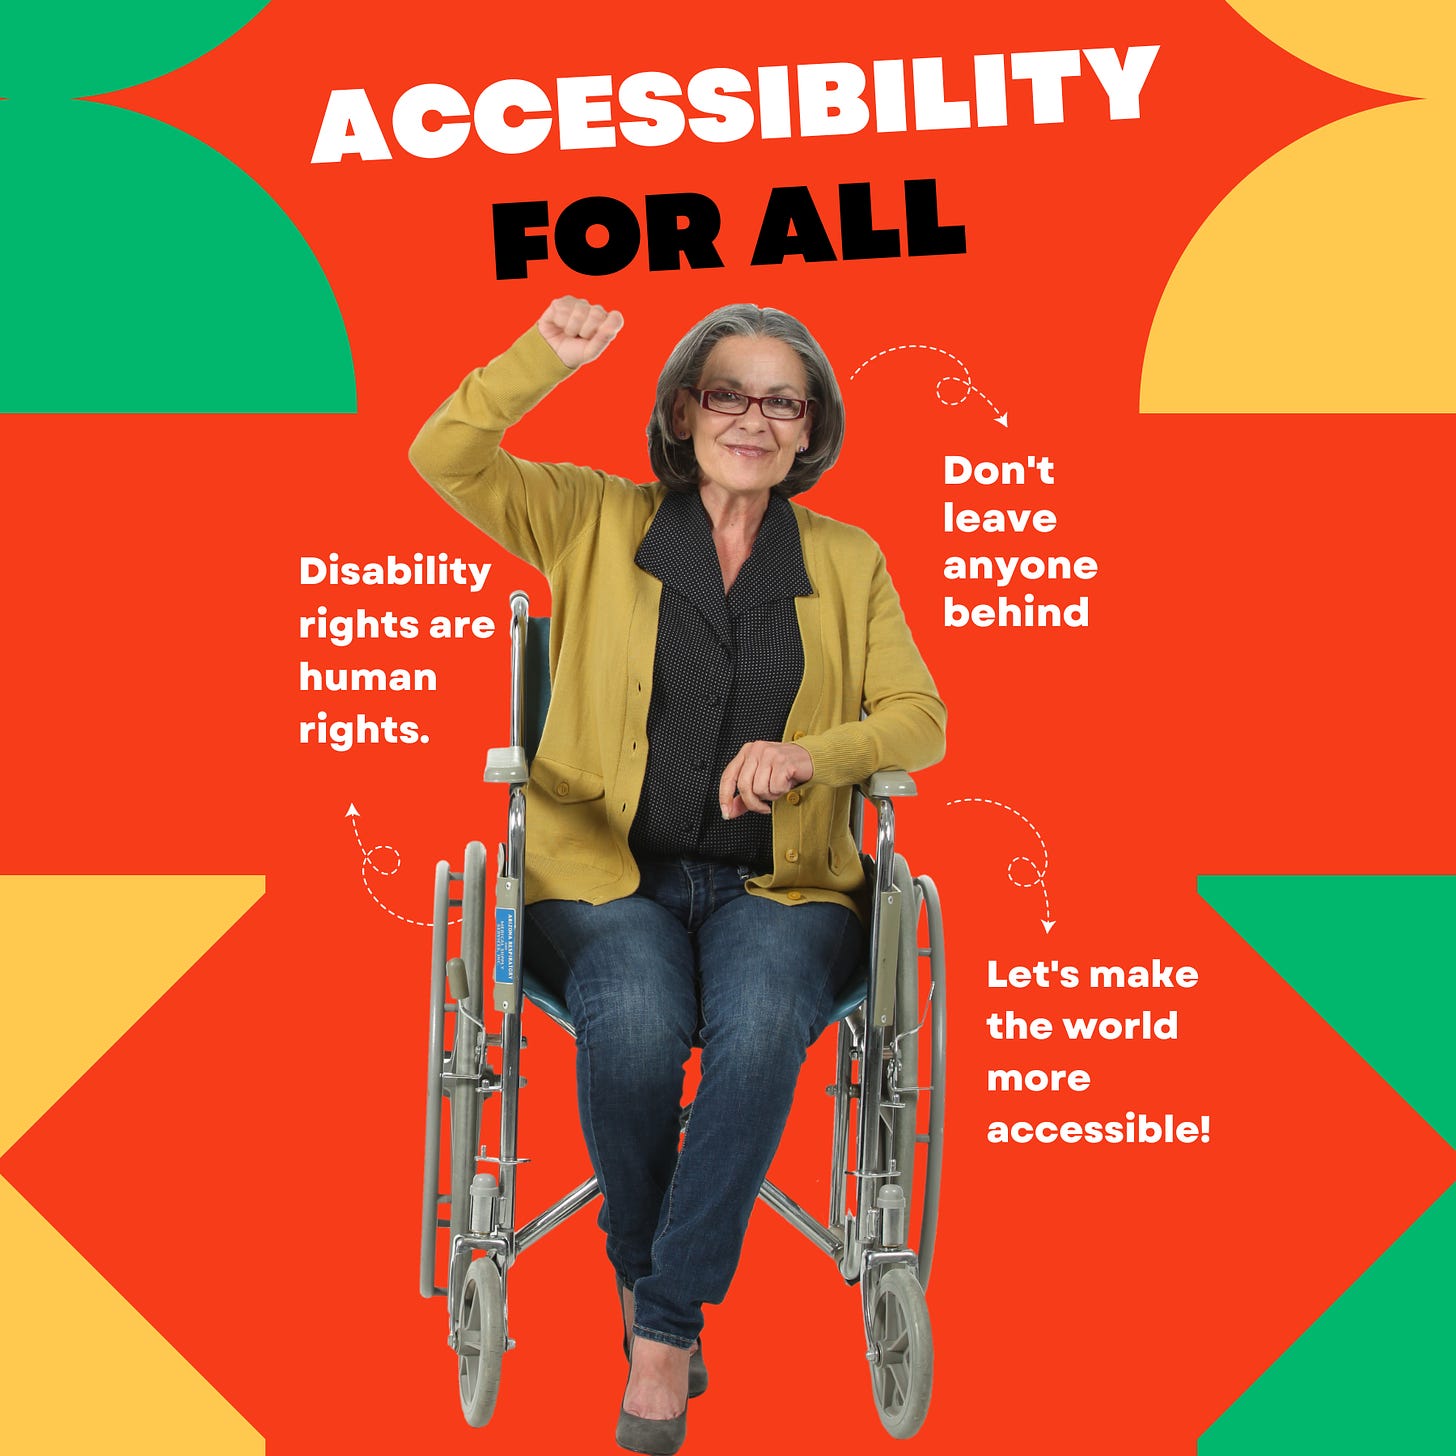 An older woman using a wheelchair raises her fist. Around her text reads "Accessibility for All. Disability rights are human rights, Don't leave anyone behind, Let's make the world more accessible!" She is sourrounded by decorative images.